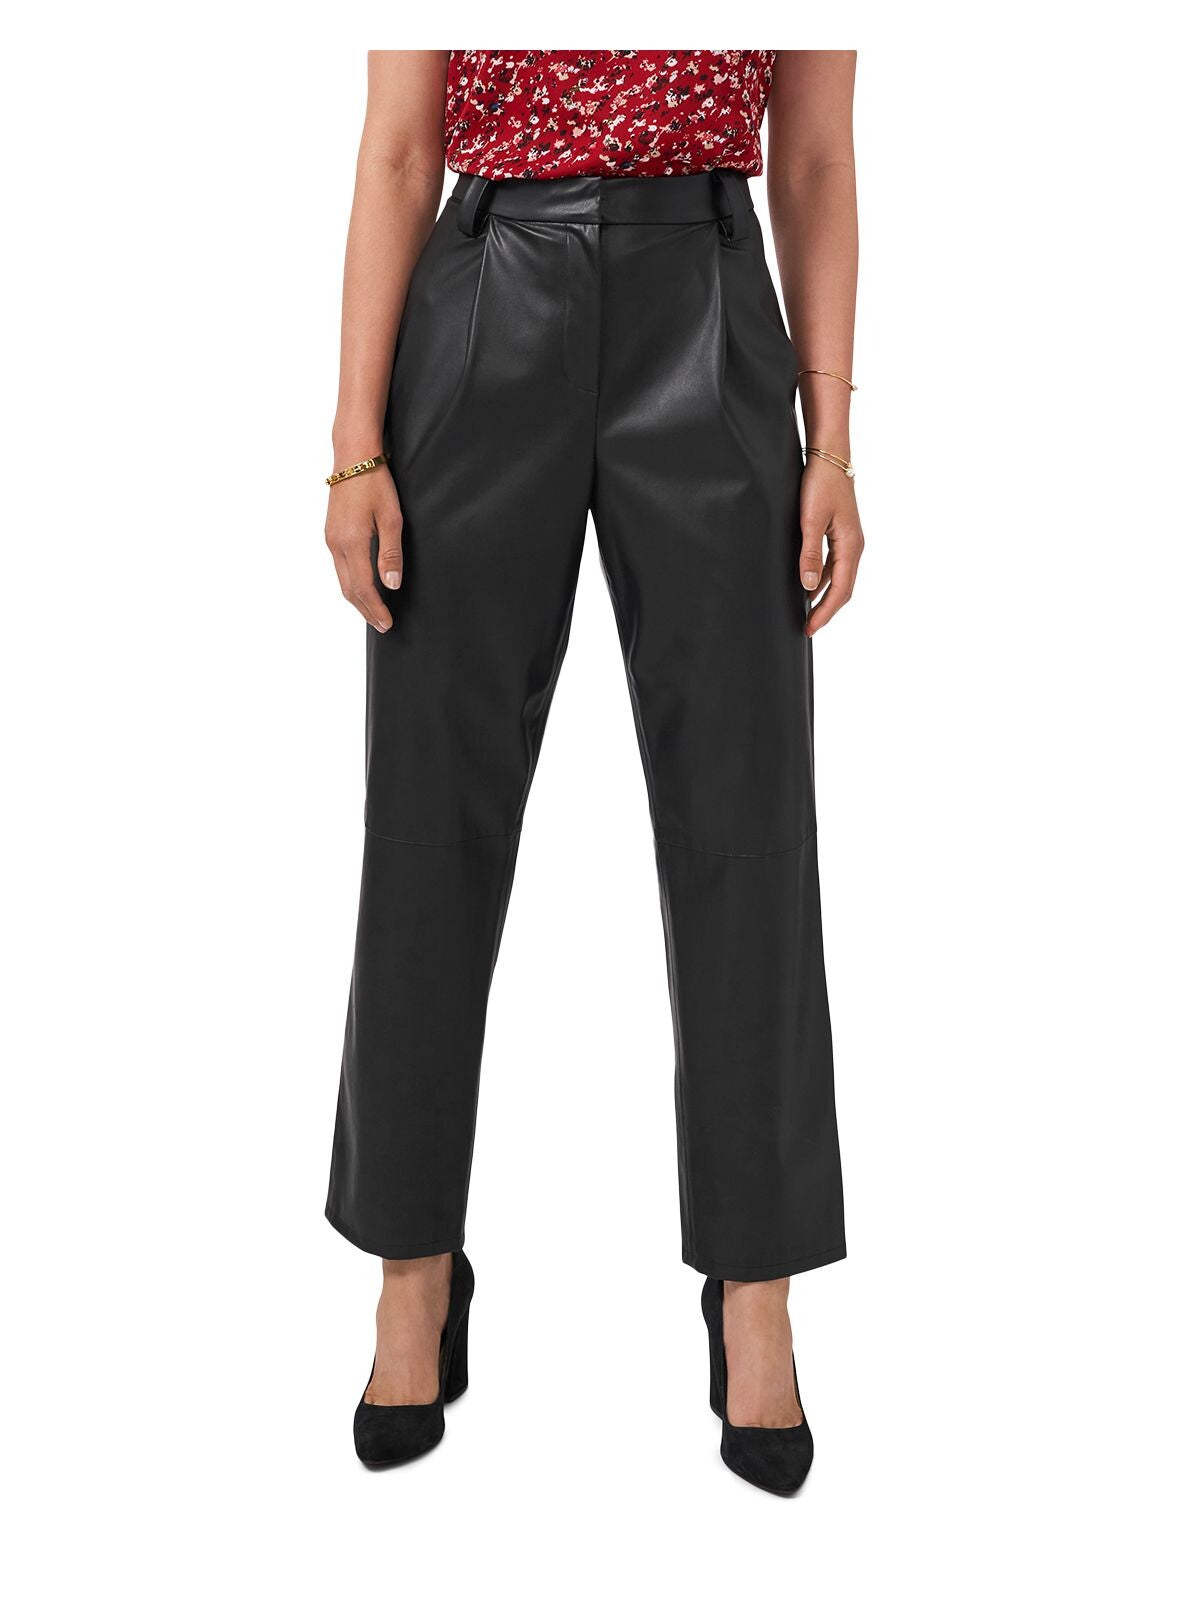 VINCE CAMUTO Womens Black Faux Leather Zippered Pocketed Hook-and-loop Closure Wear To Work Straight leg Pants 2